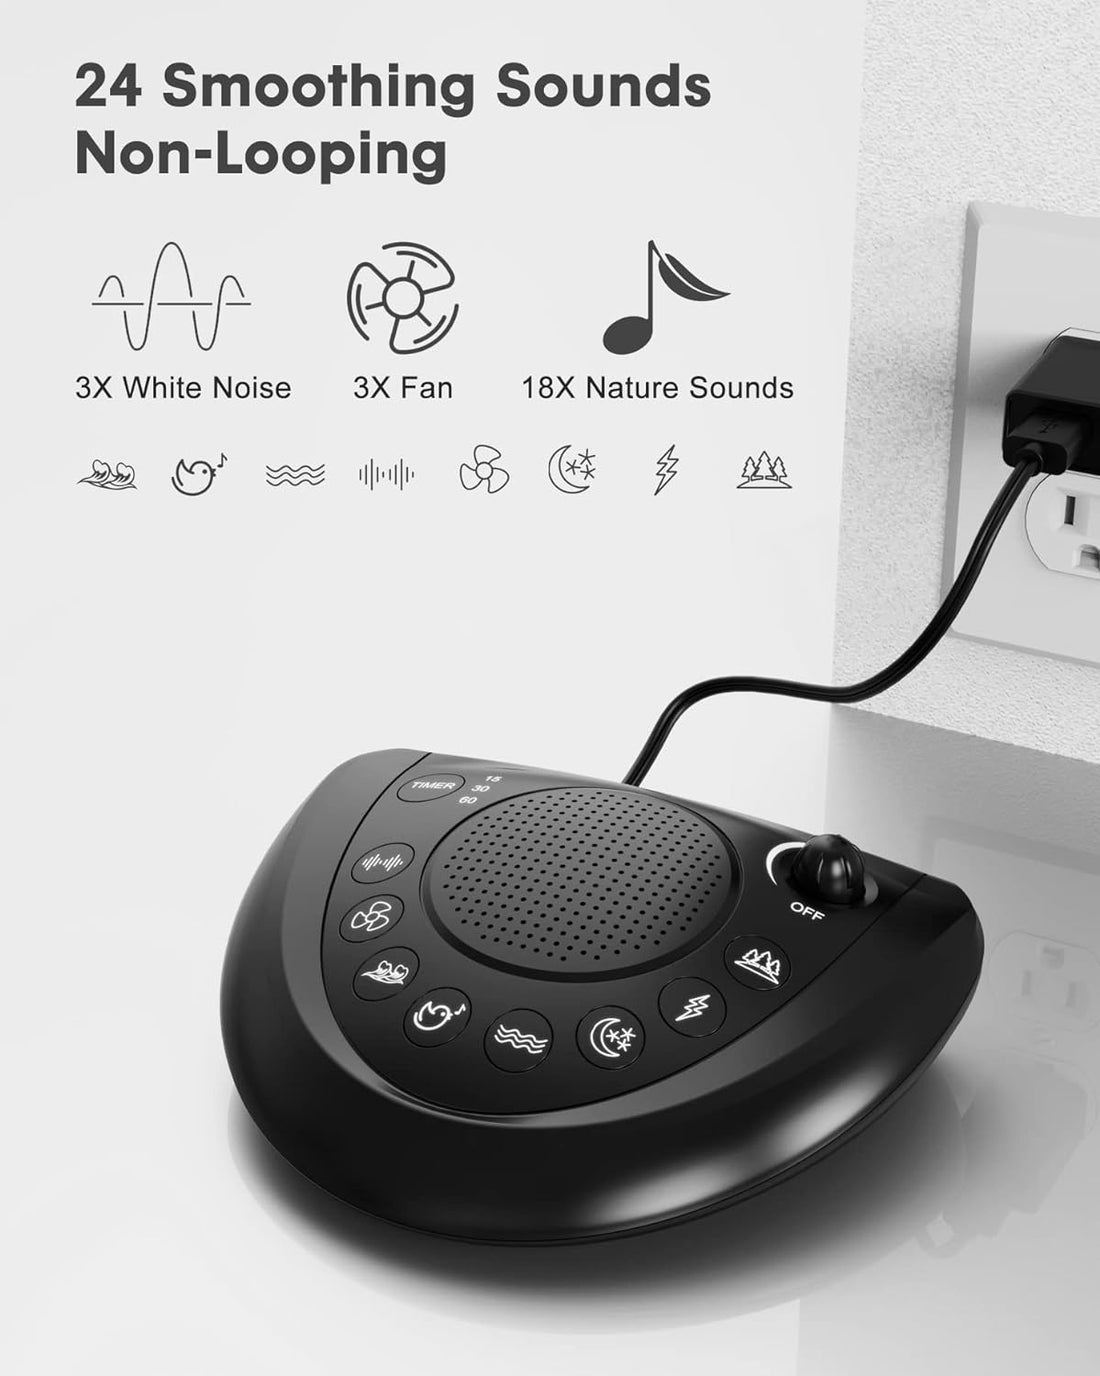 White Noise Machine – Portable Sound Machine Sleep Therapy with 24 Non Looping Natural Soothing Sounds, Memory Function, Auto-Off Timer, 2 USB Charger, Headphone Jack for Adults Baby Kids Travel